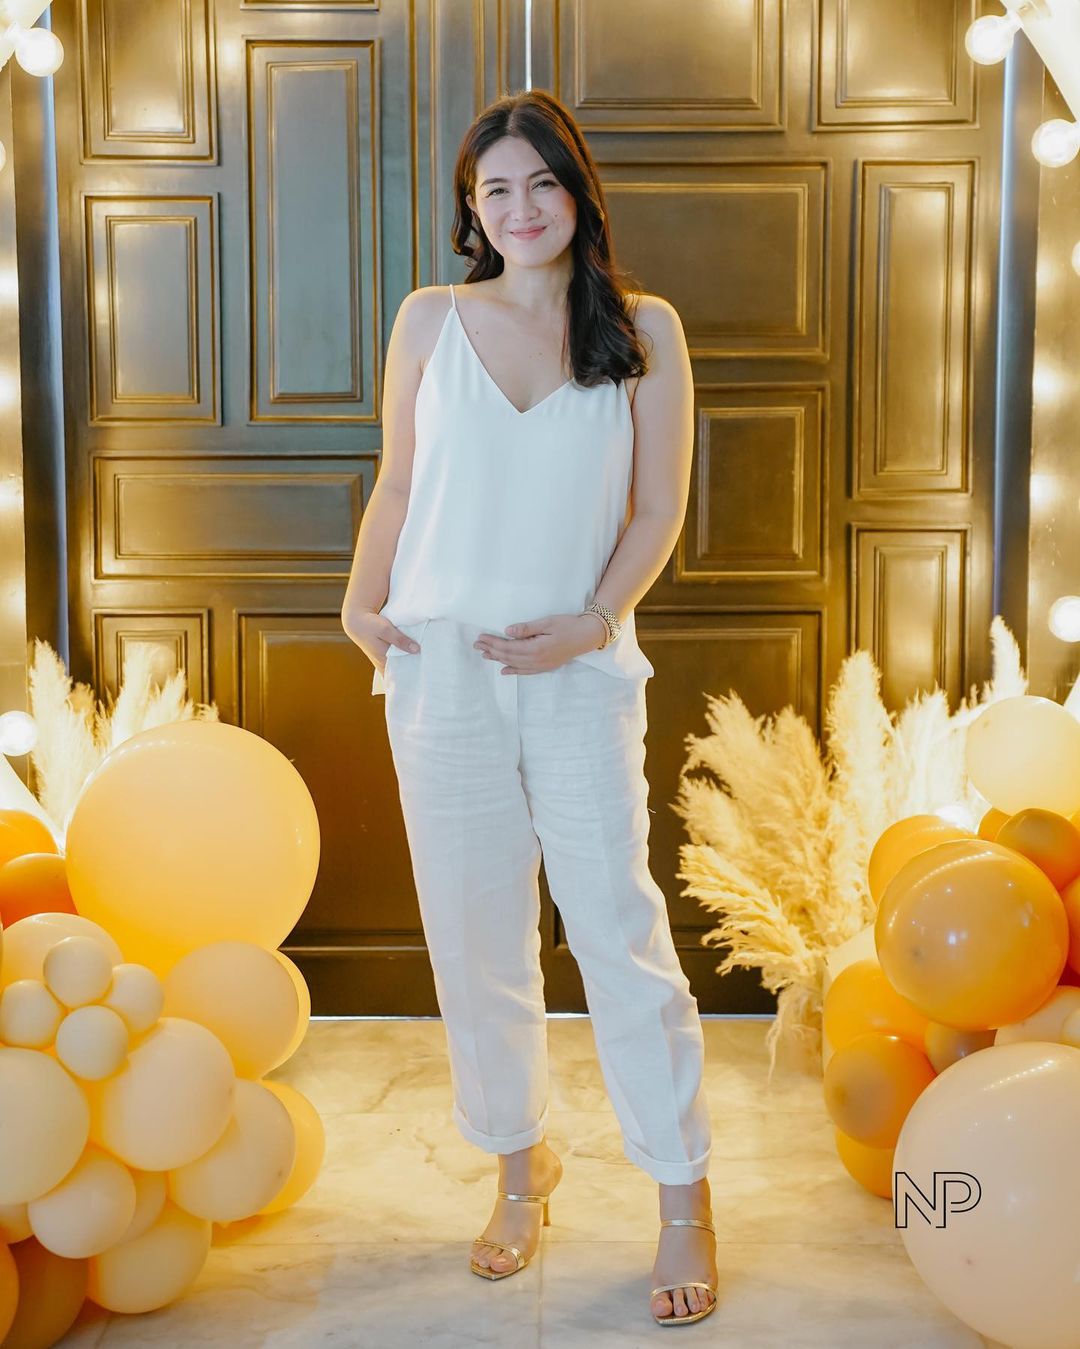 dimples romana gender reveal party